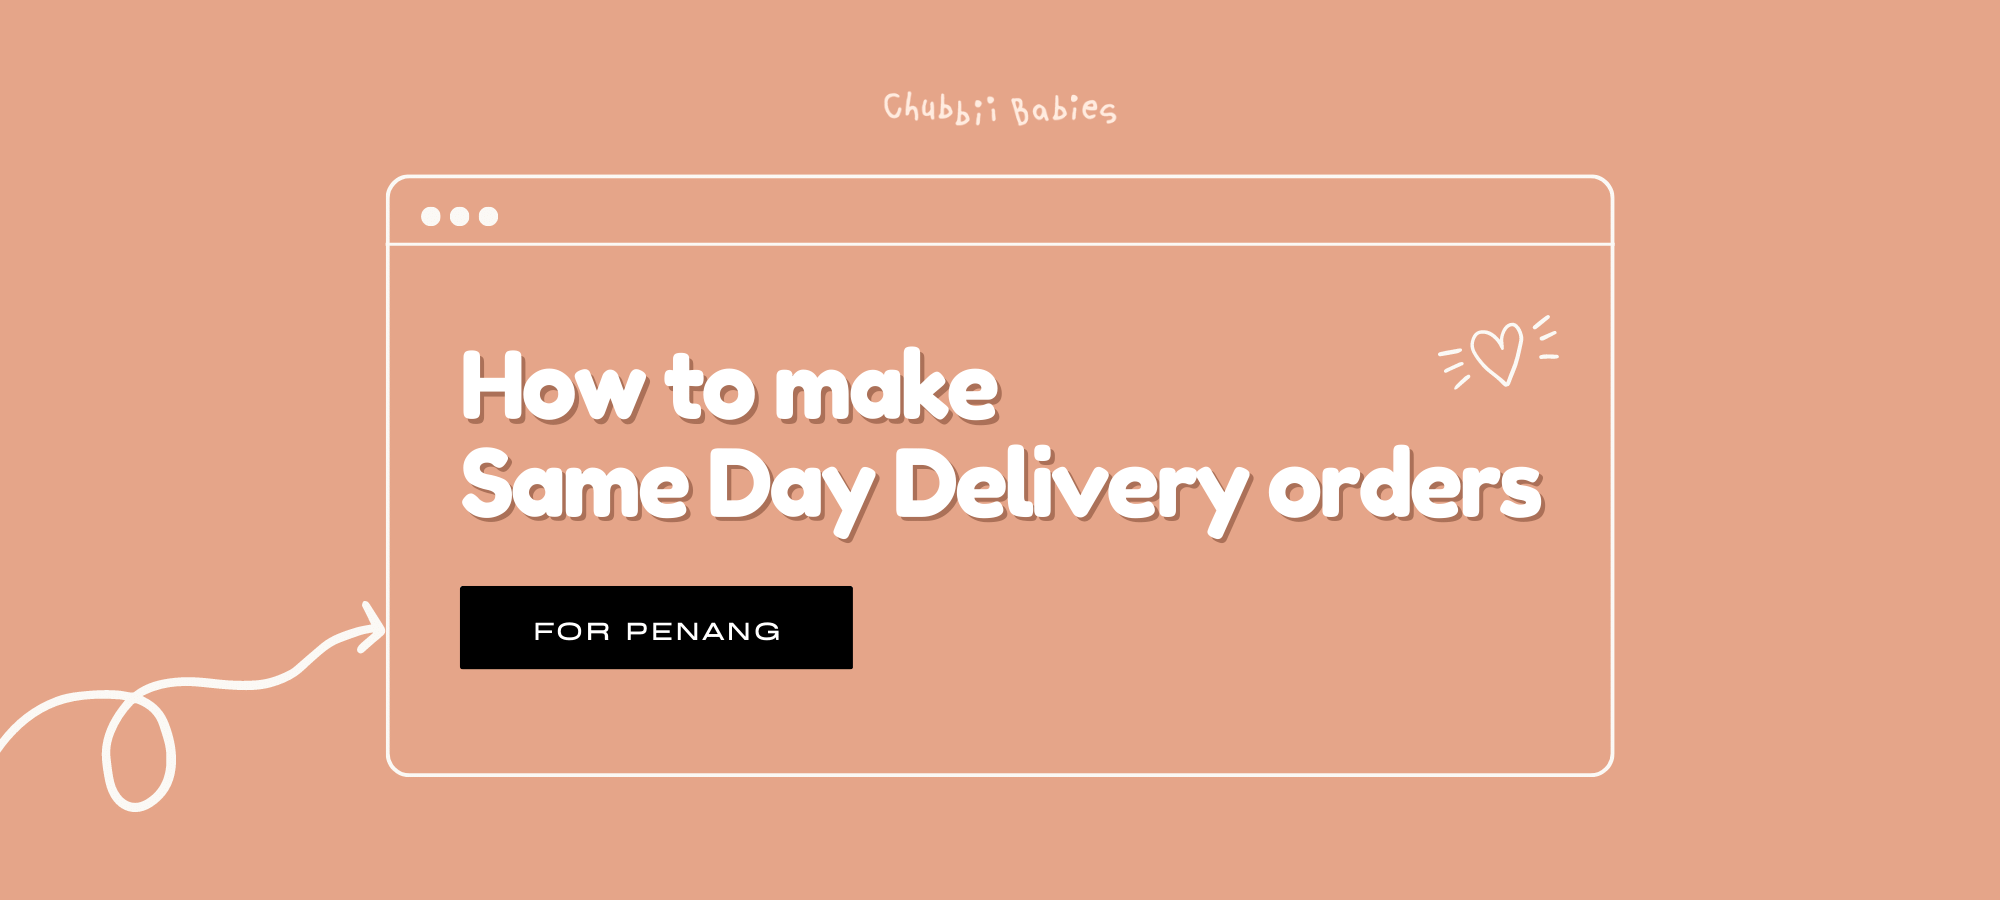 Same Day Delivery: A Step-by-Step Guide for Penang Customers